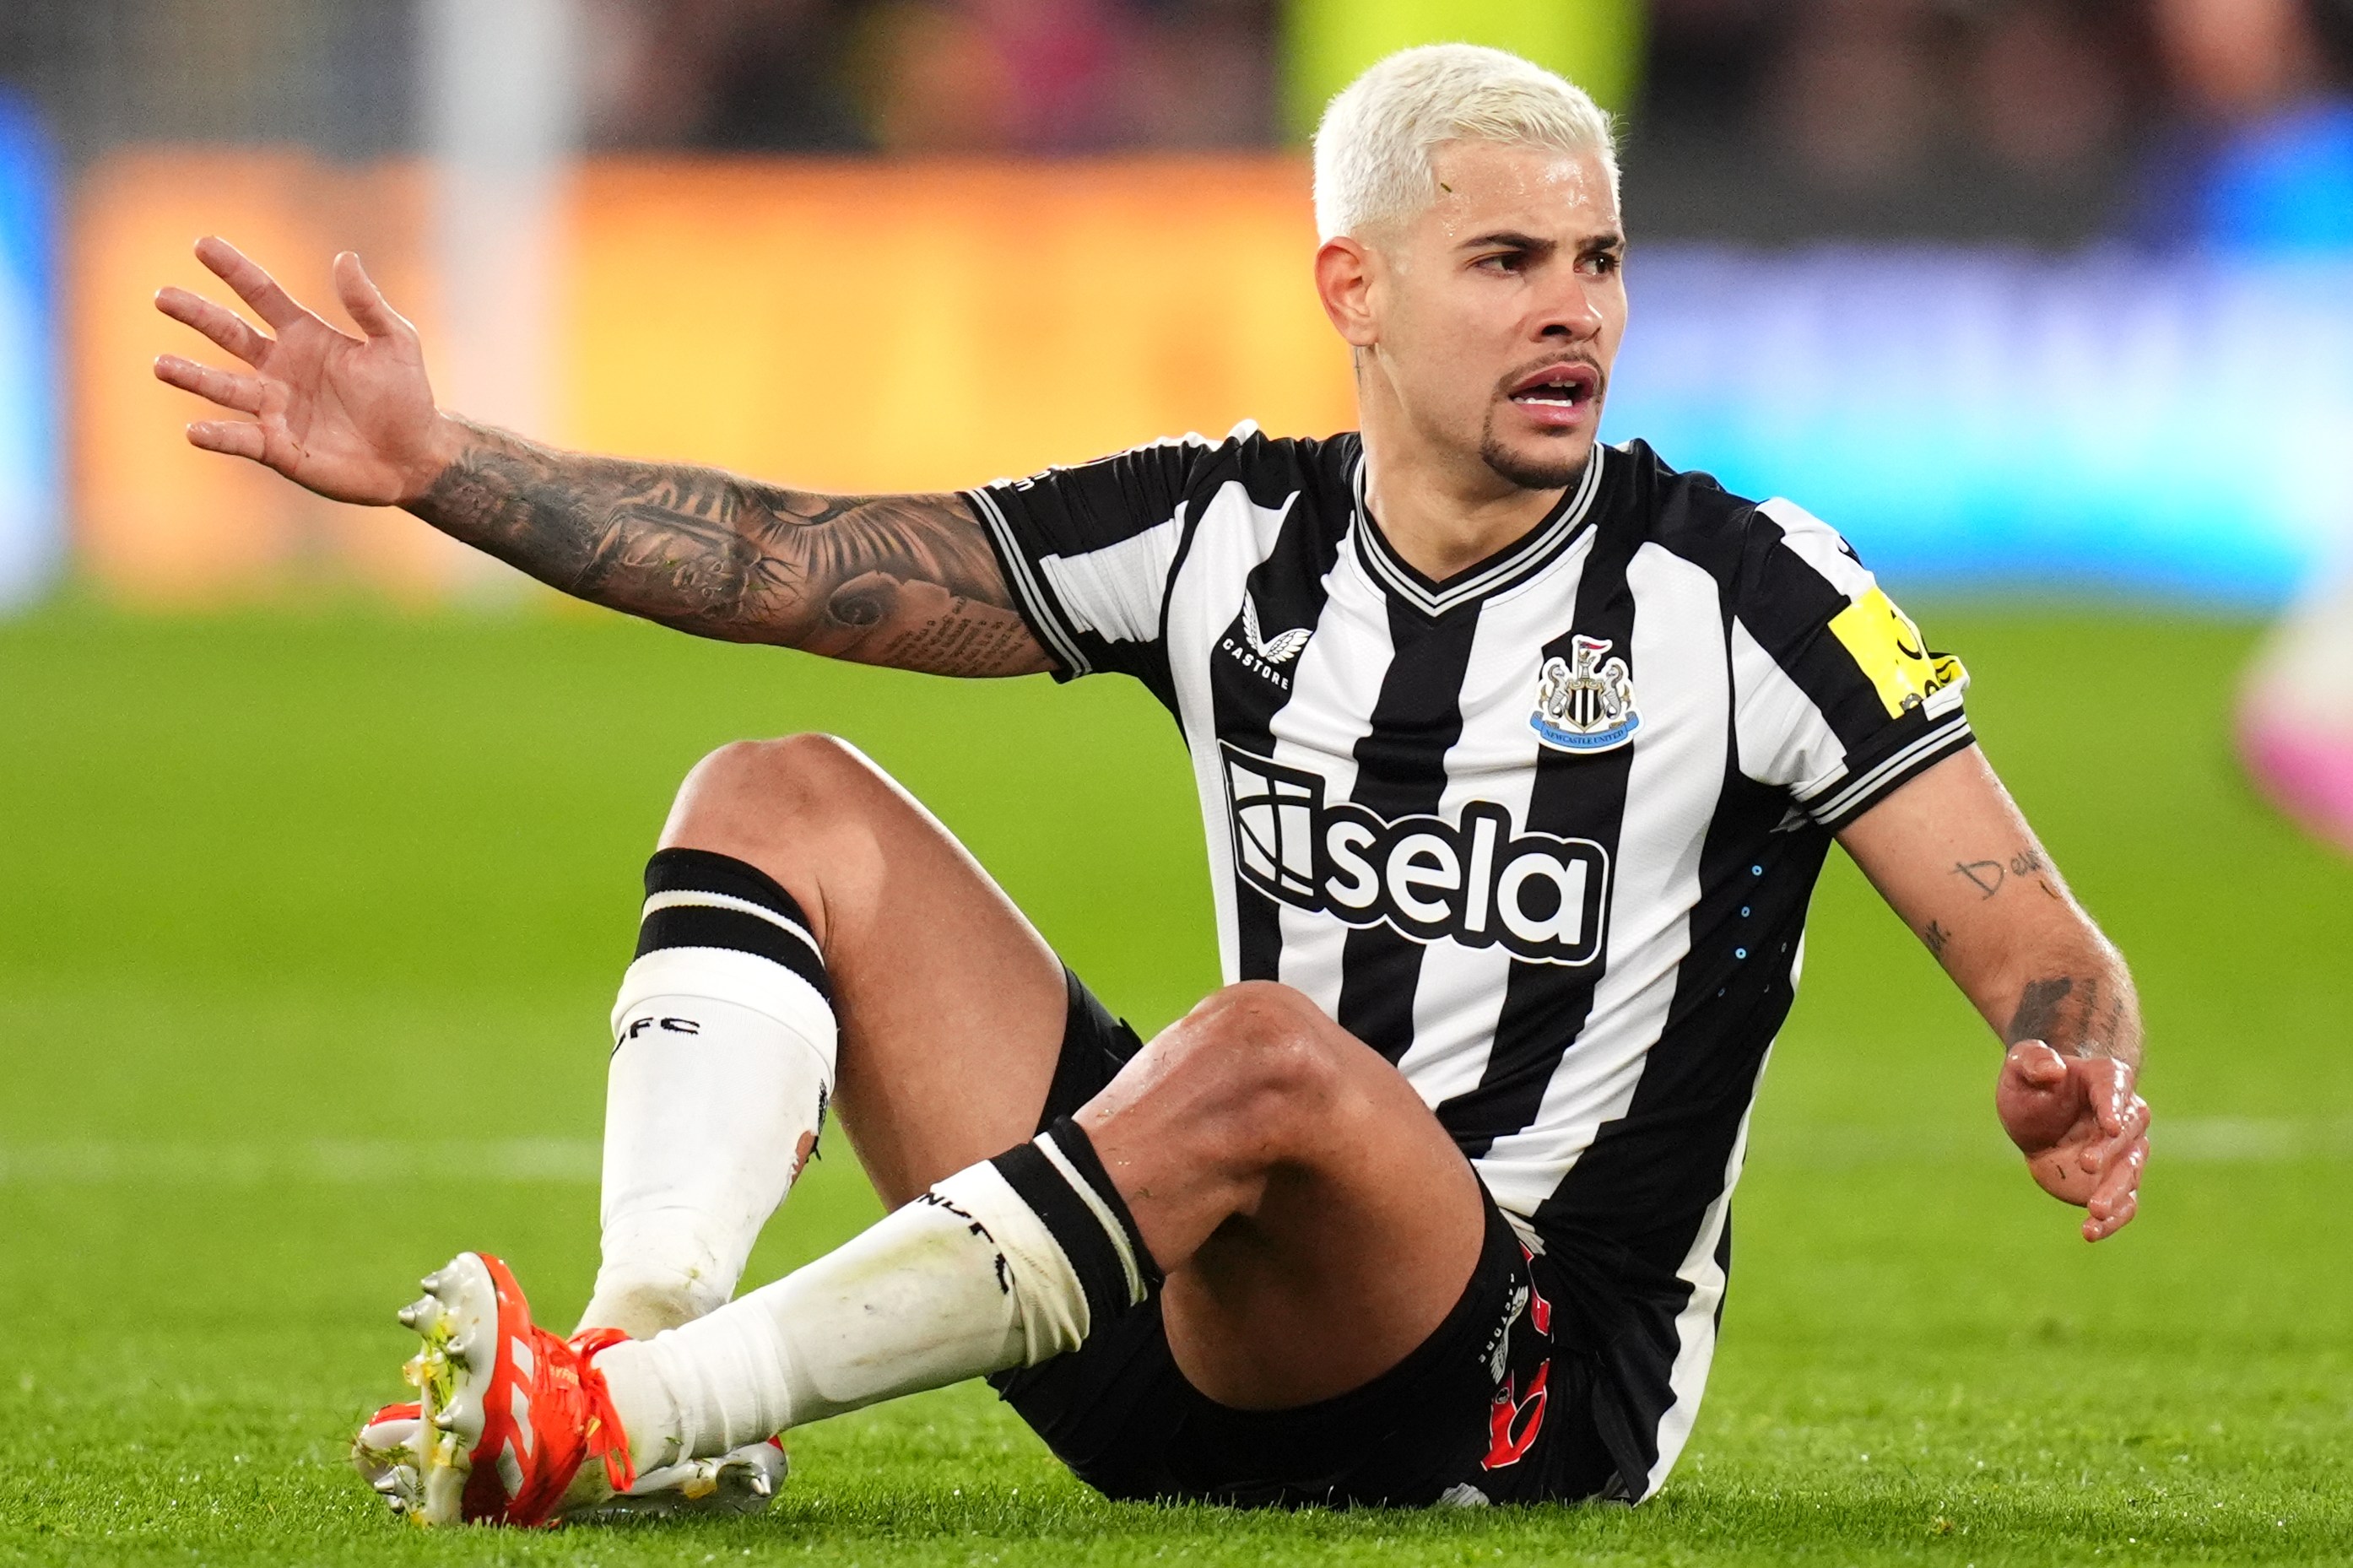 Guimarães has been linked with a possible big-money departure this summer, with Manchester City, Arsenal and Paris Saint-Germain all interested in the 26-year-old